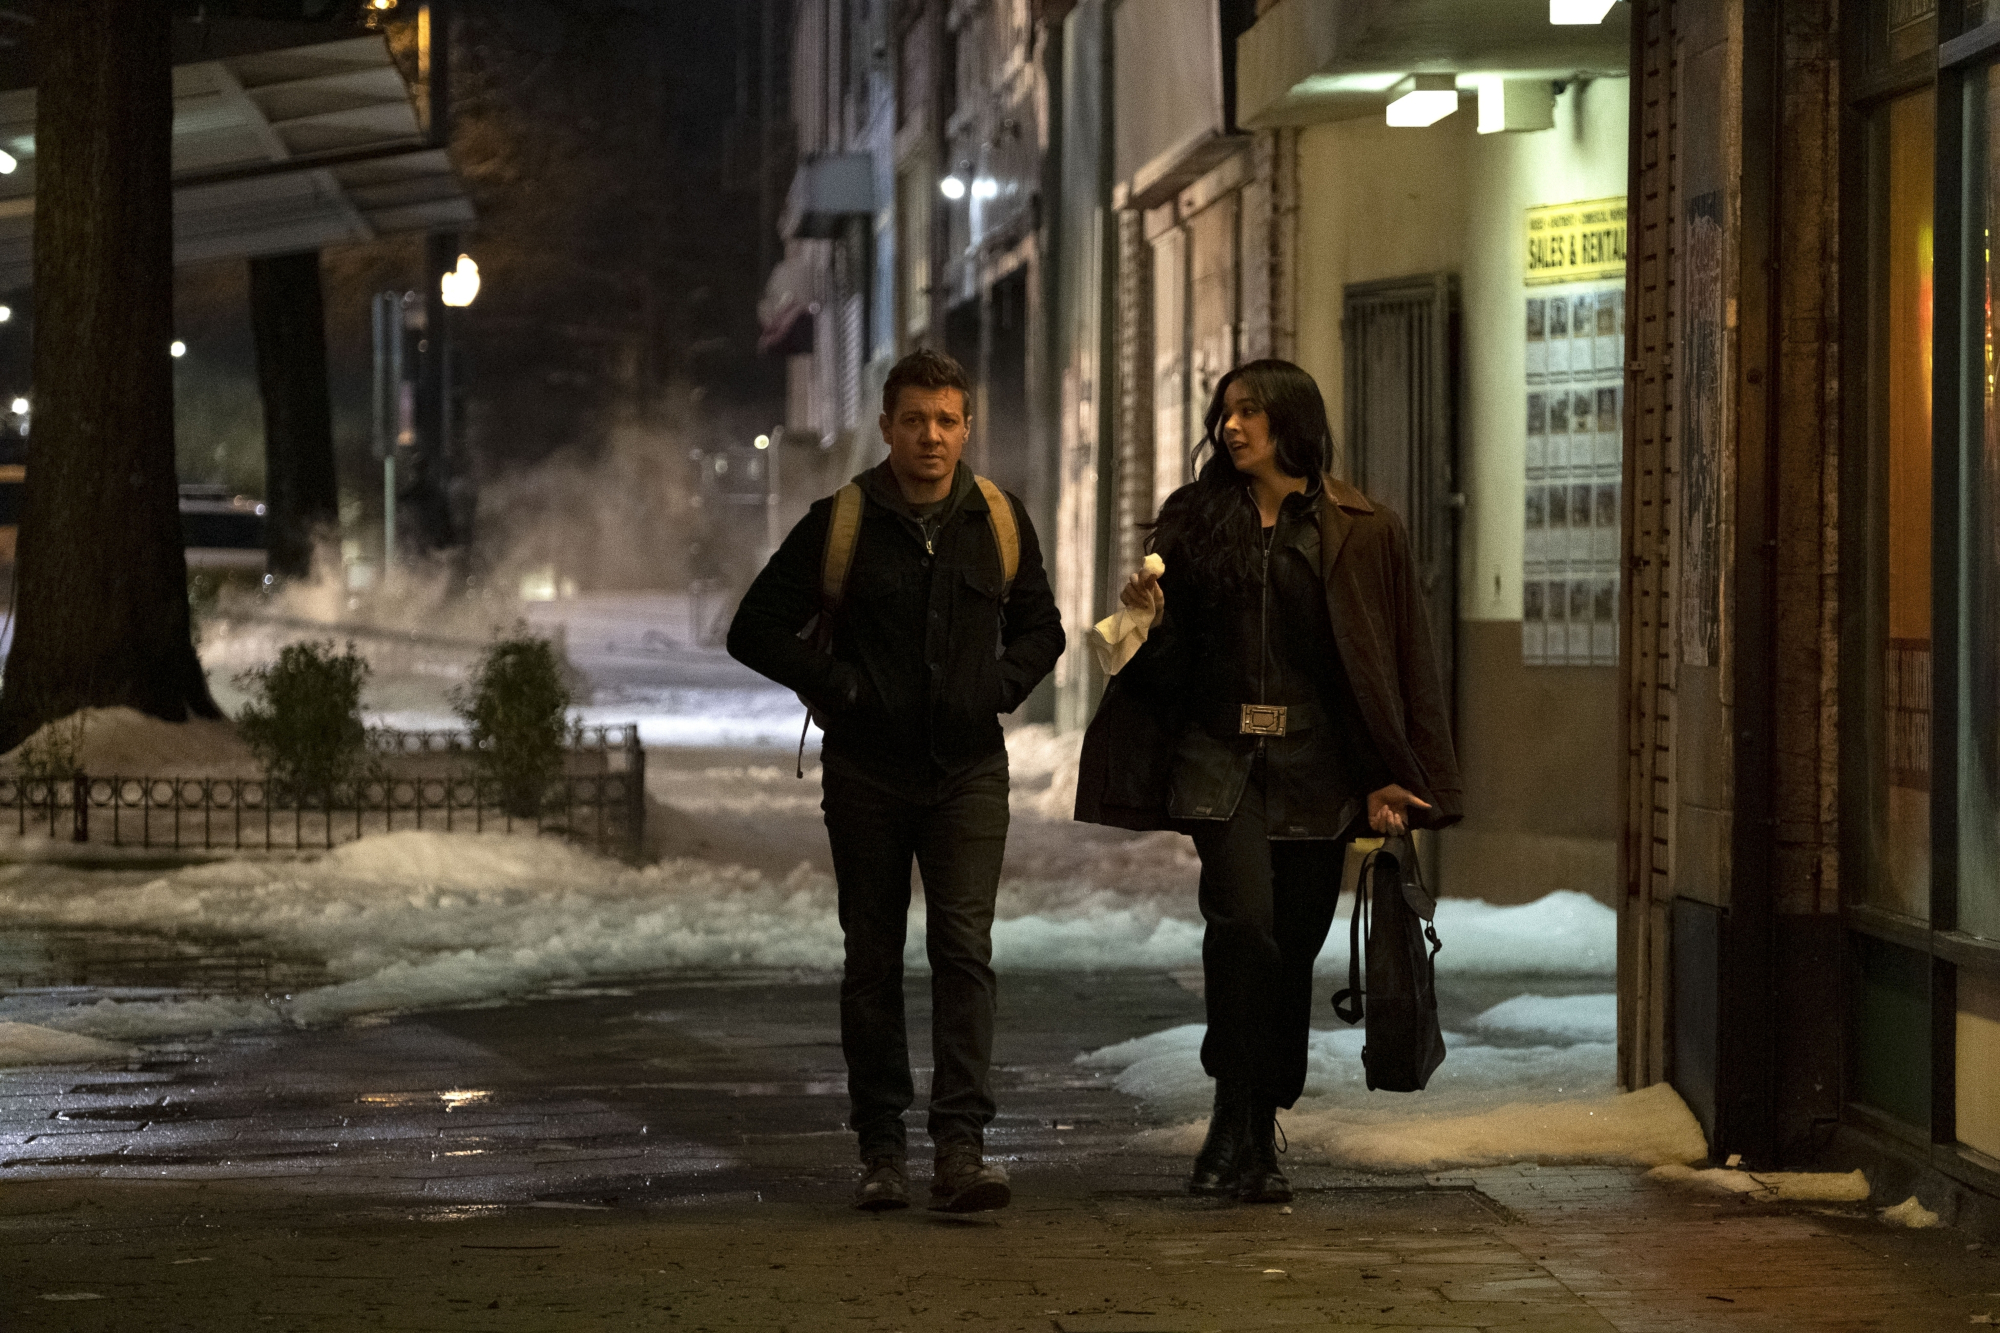 Jeremy Renner and Hailee Steinfeld as Clint Barton and Kate Bishop in in Marvel's 'Hawkeye.' They're walking next to one another down a street in New York City.